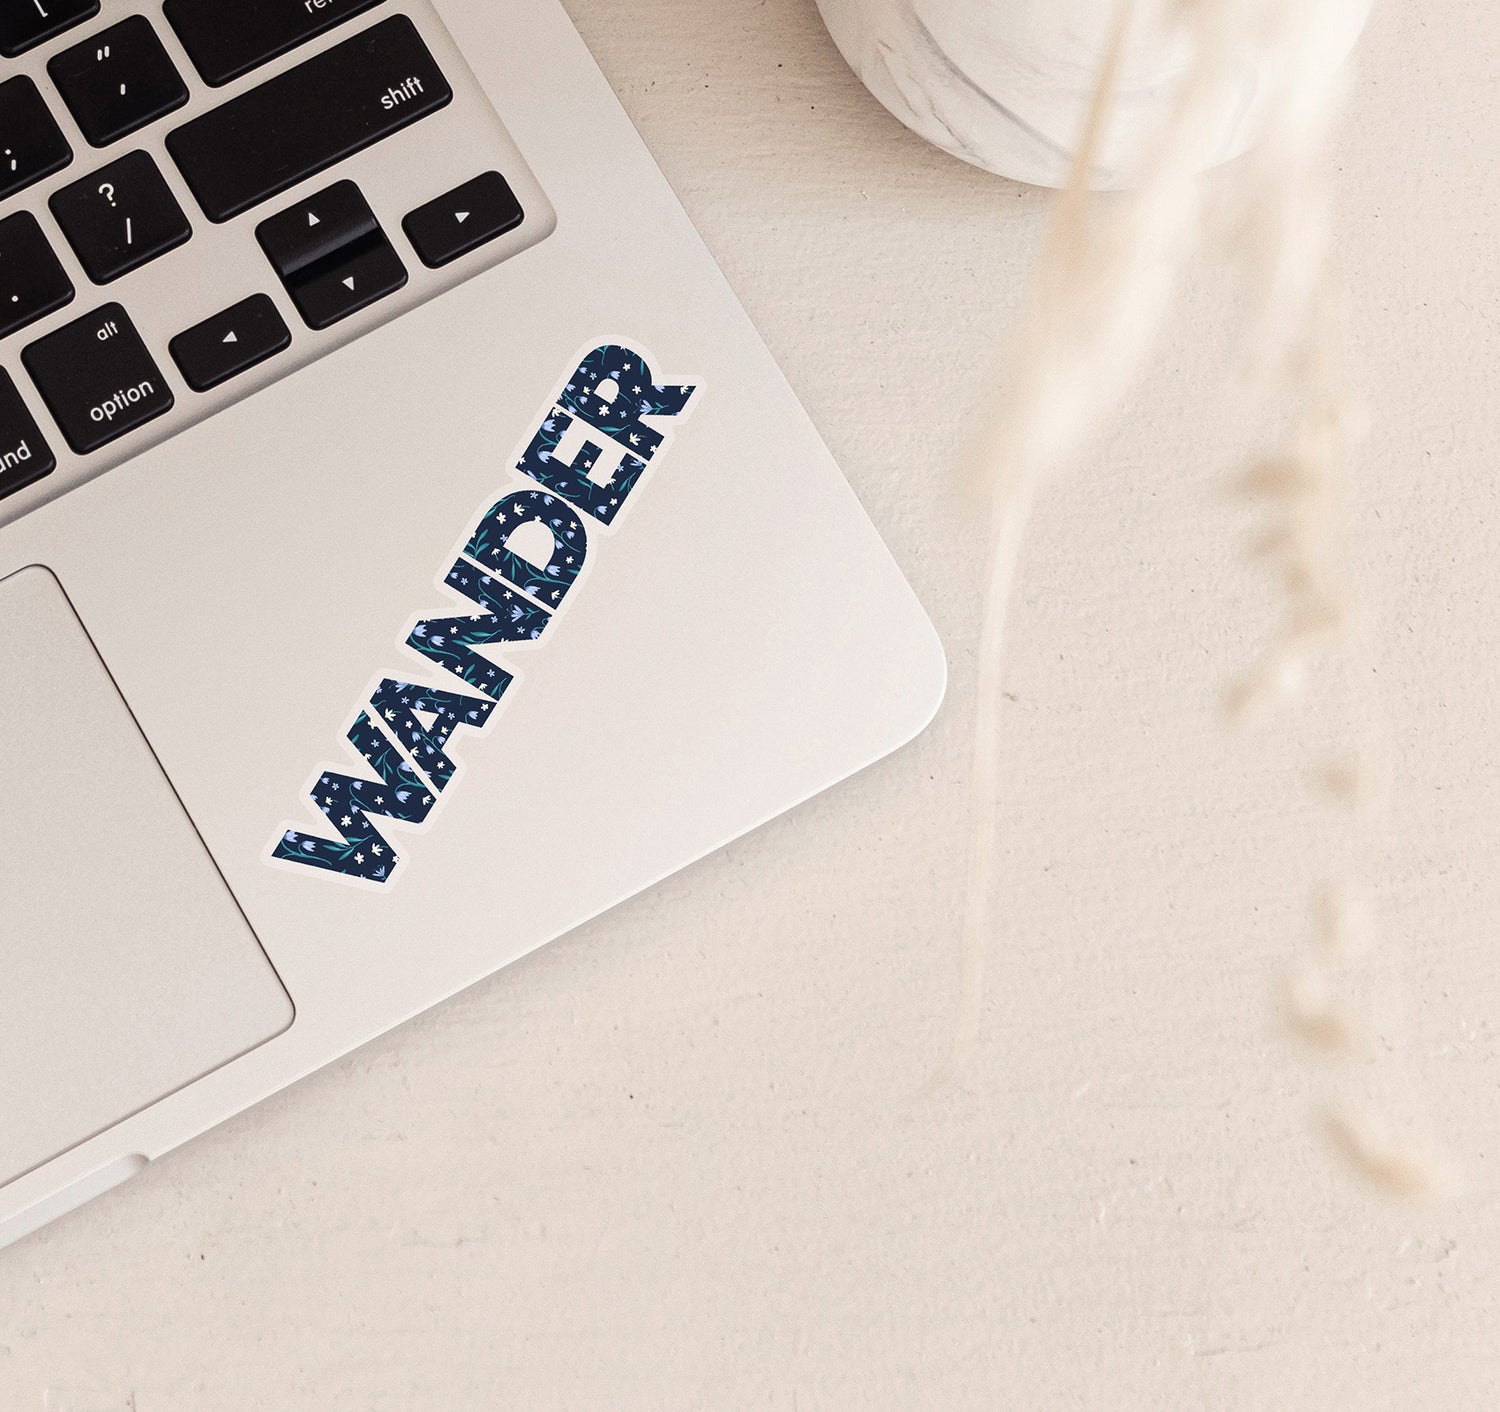 Wander laptop decal with a blue floral pattern